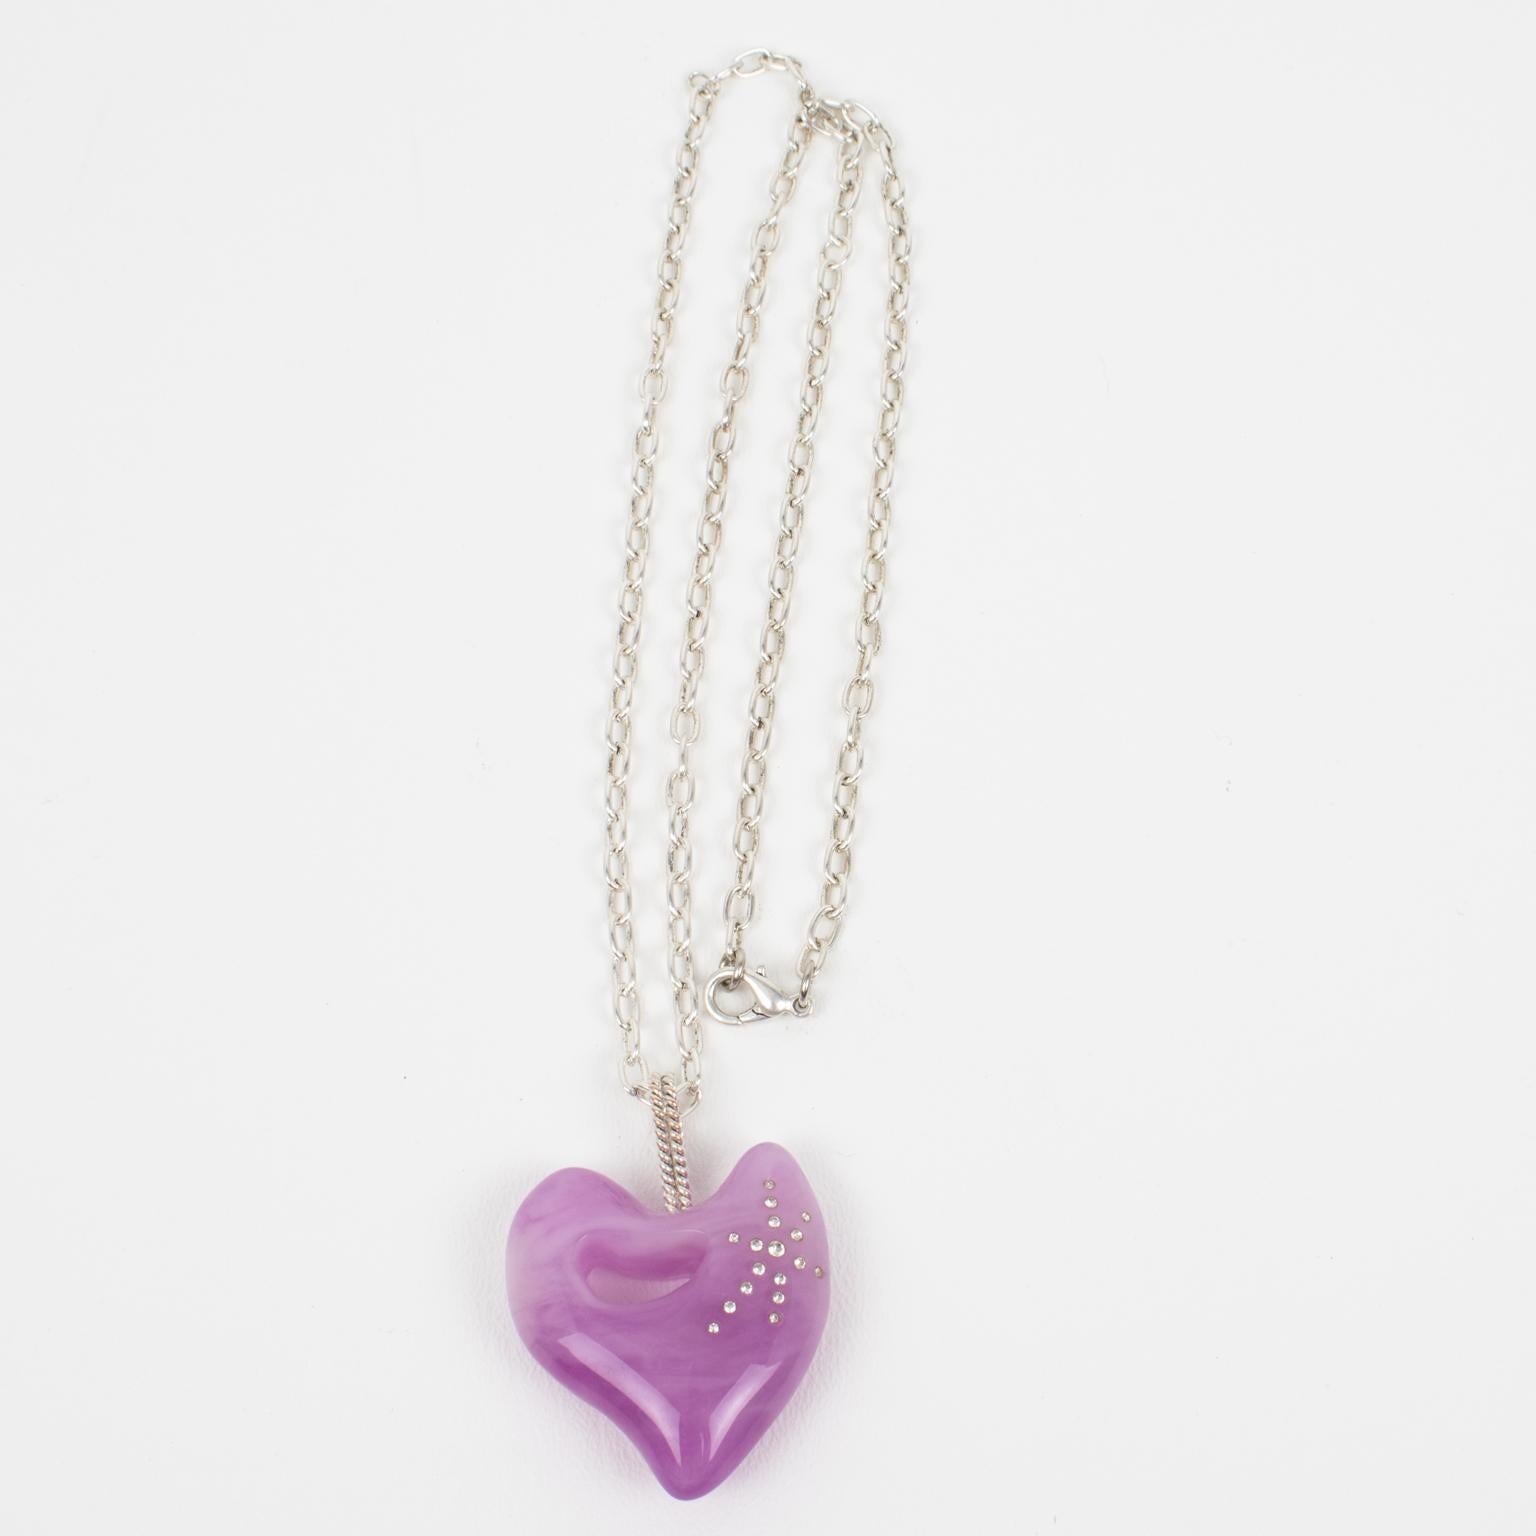 Christian Lacroix Silver Plate Chain Necklace with Purple Lavender Resin Heart In Good Condition For Sale In Atlanta, GA